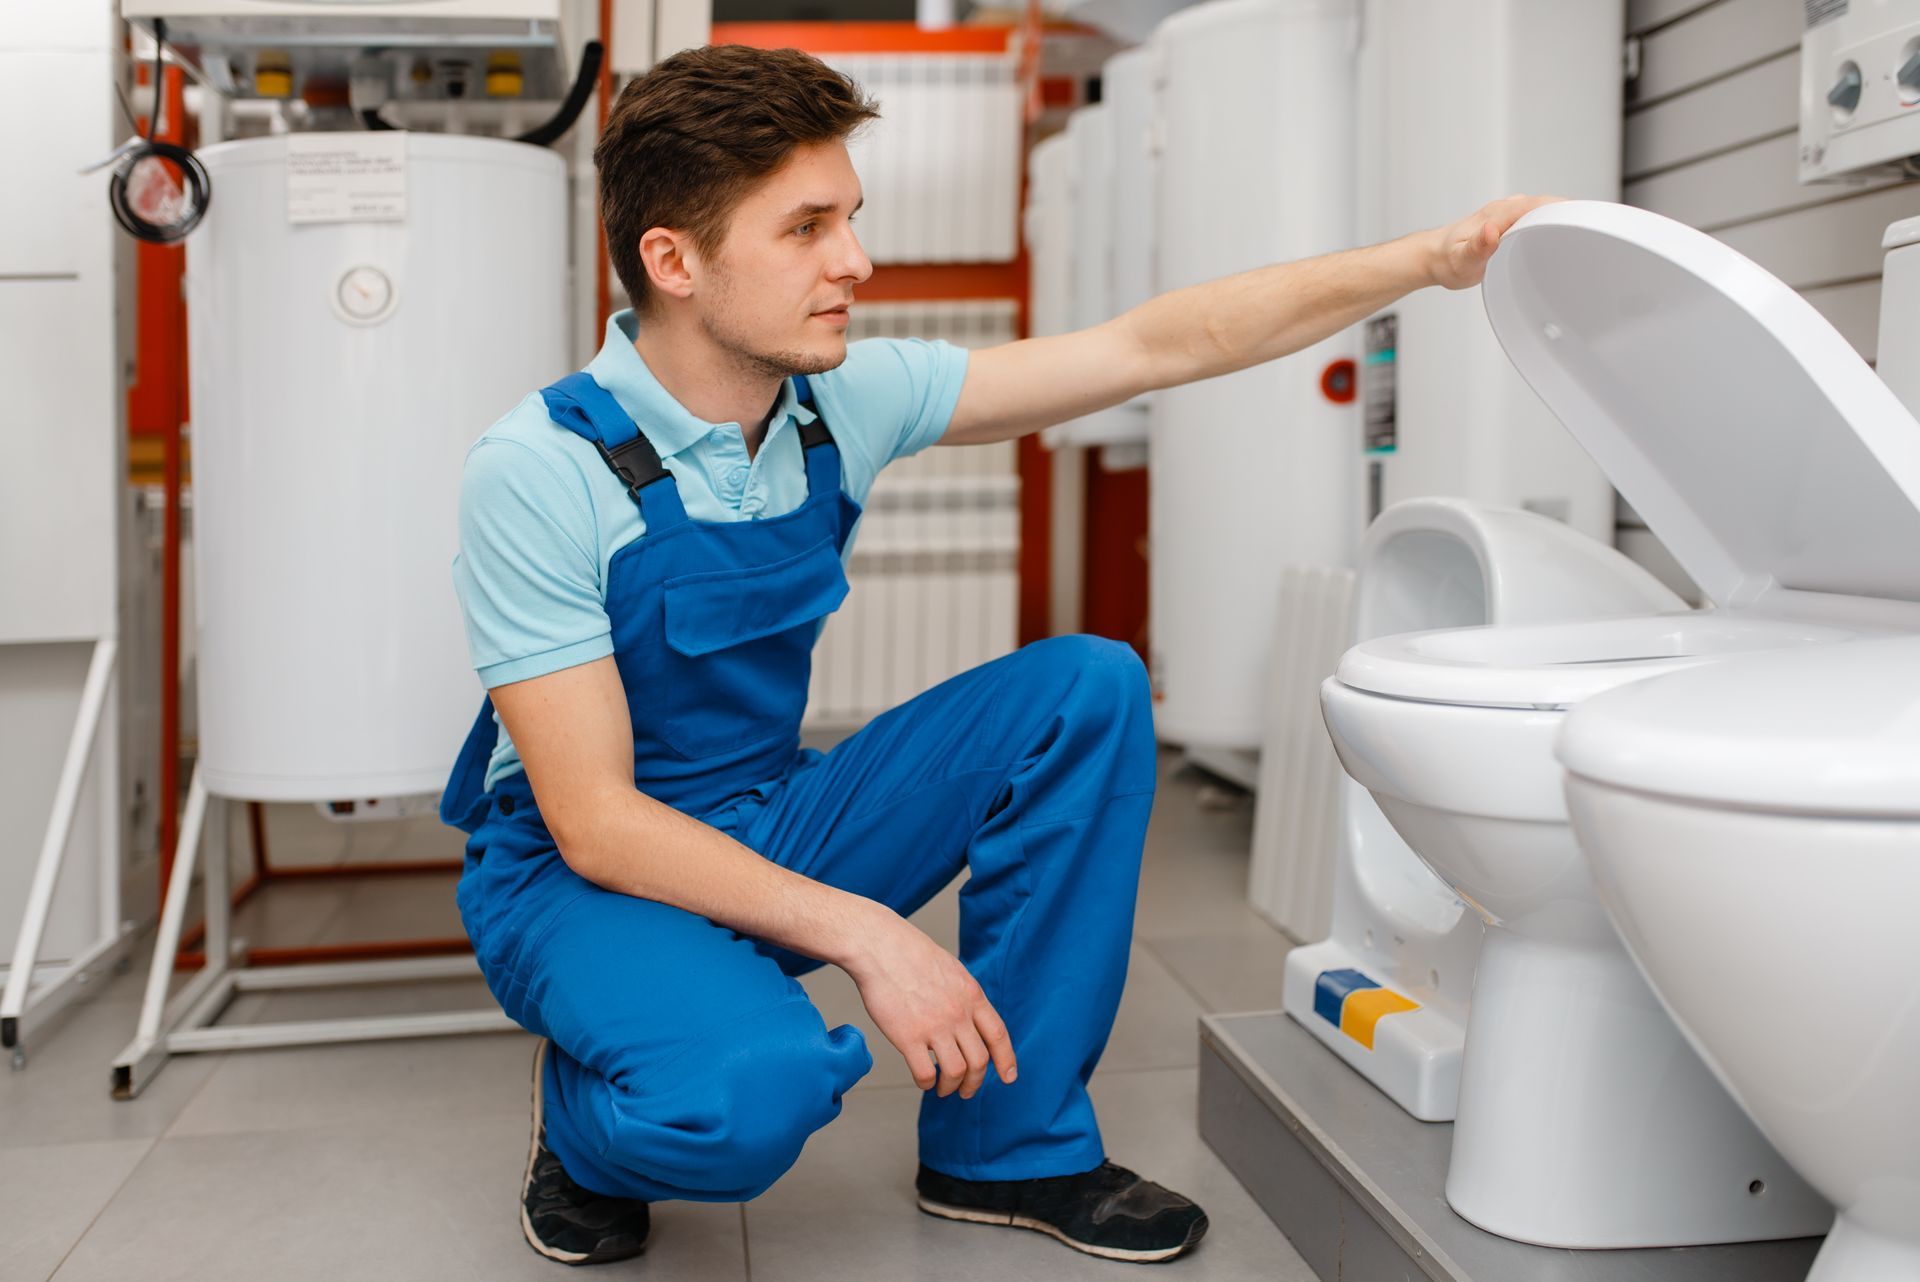 A man is kneeling down in front of a toilet in a bathroom.